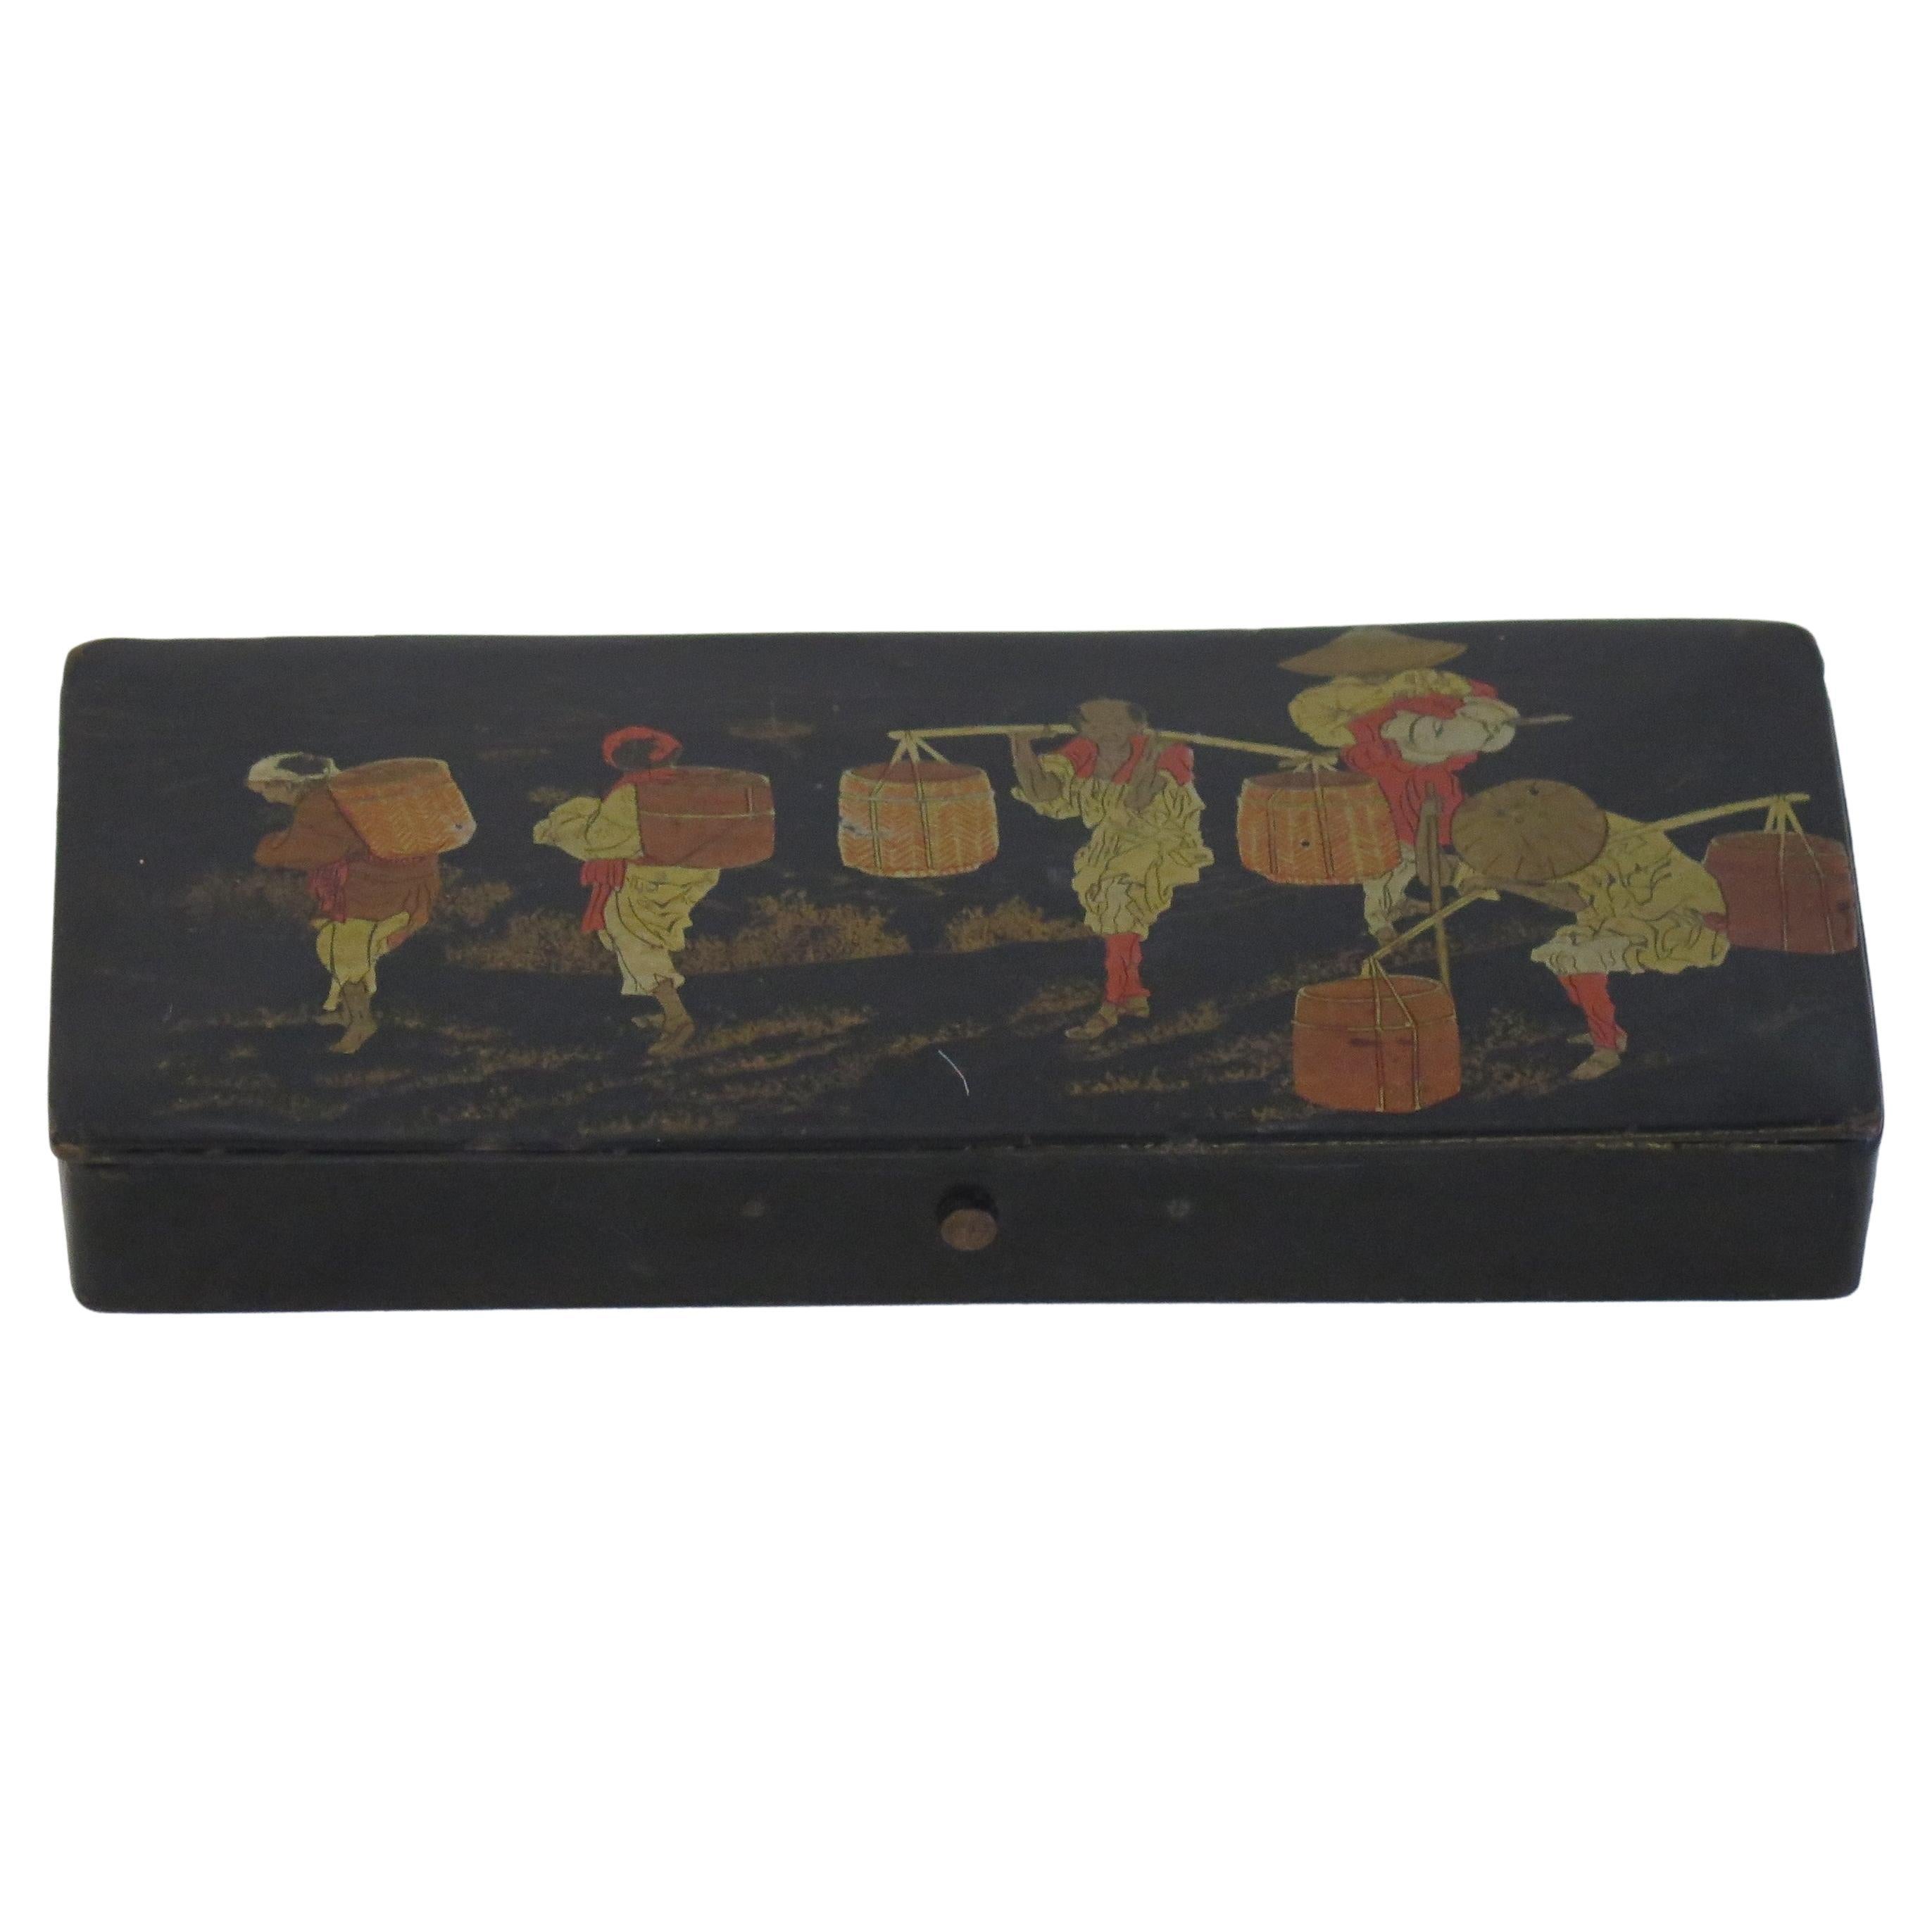 This is a good papier mâché, rectangular shaped black lacquered box with a hinged lid, hand enamelled and gilded, made in Japan during the 19th century, early Meiji period.

This rectangular shaped papier mâché box has a well fitting hinged lid,